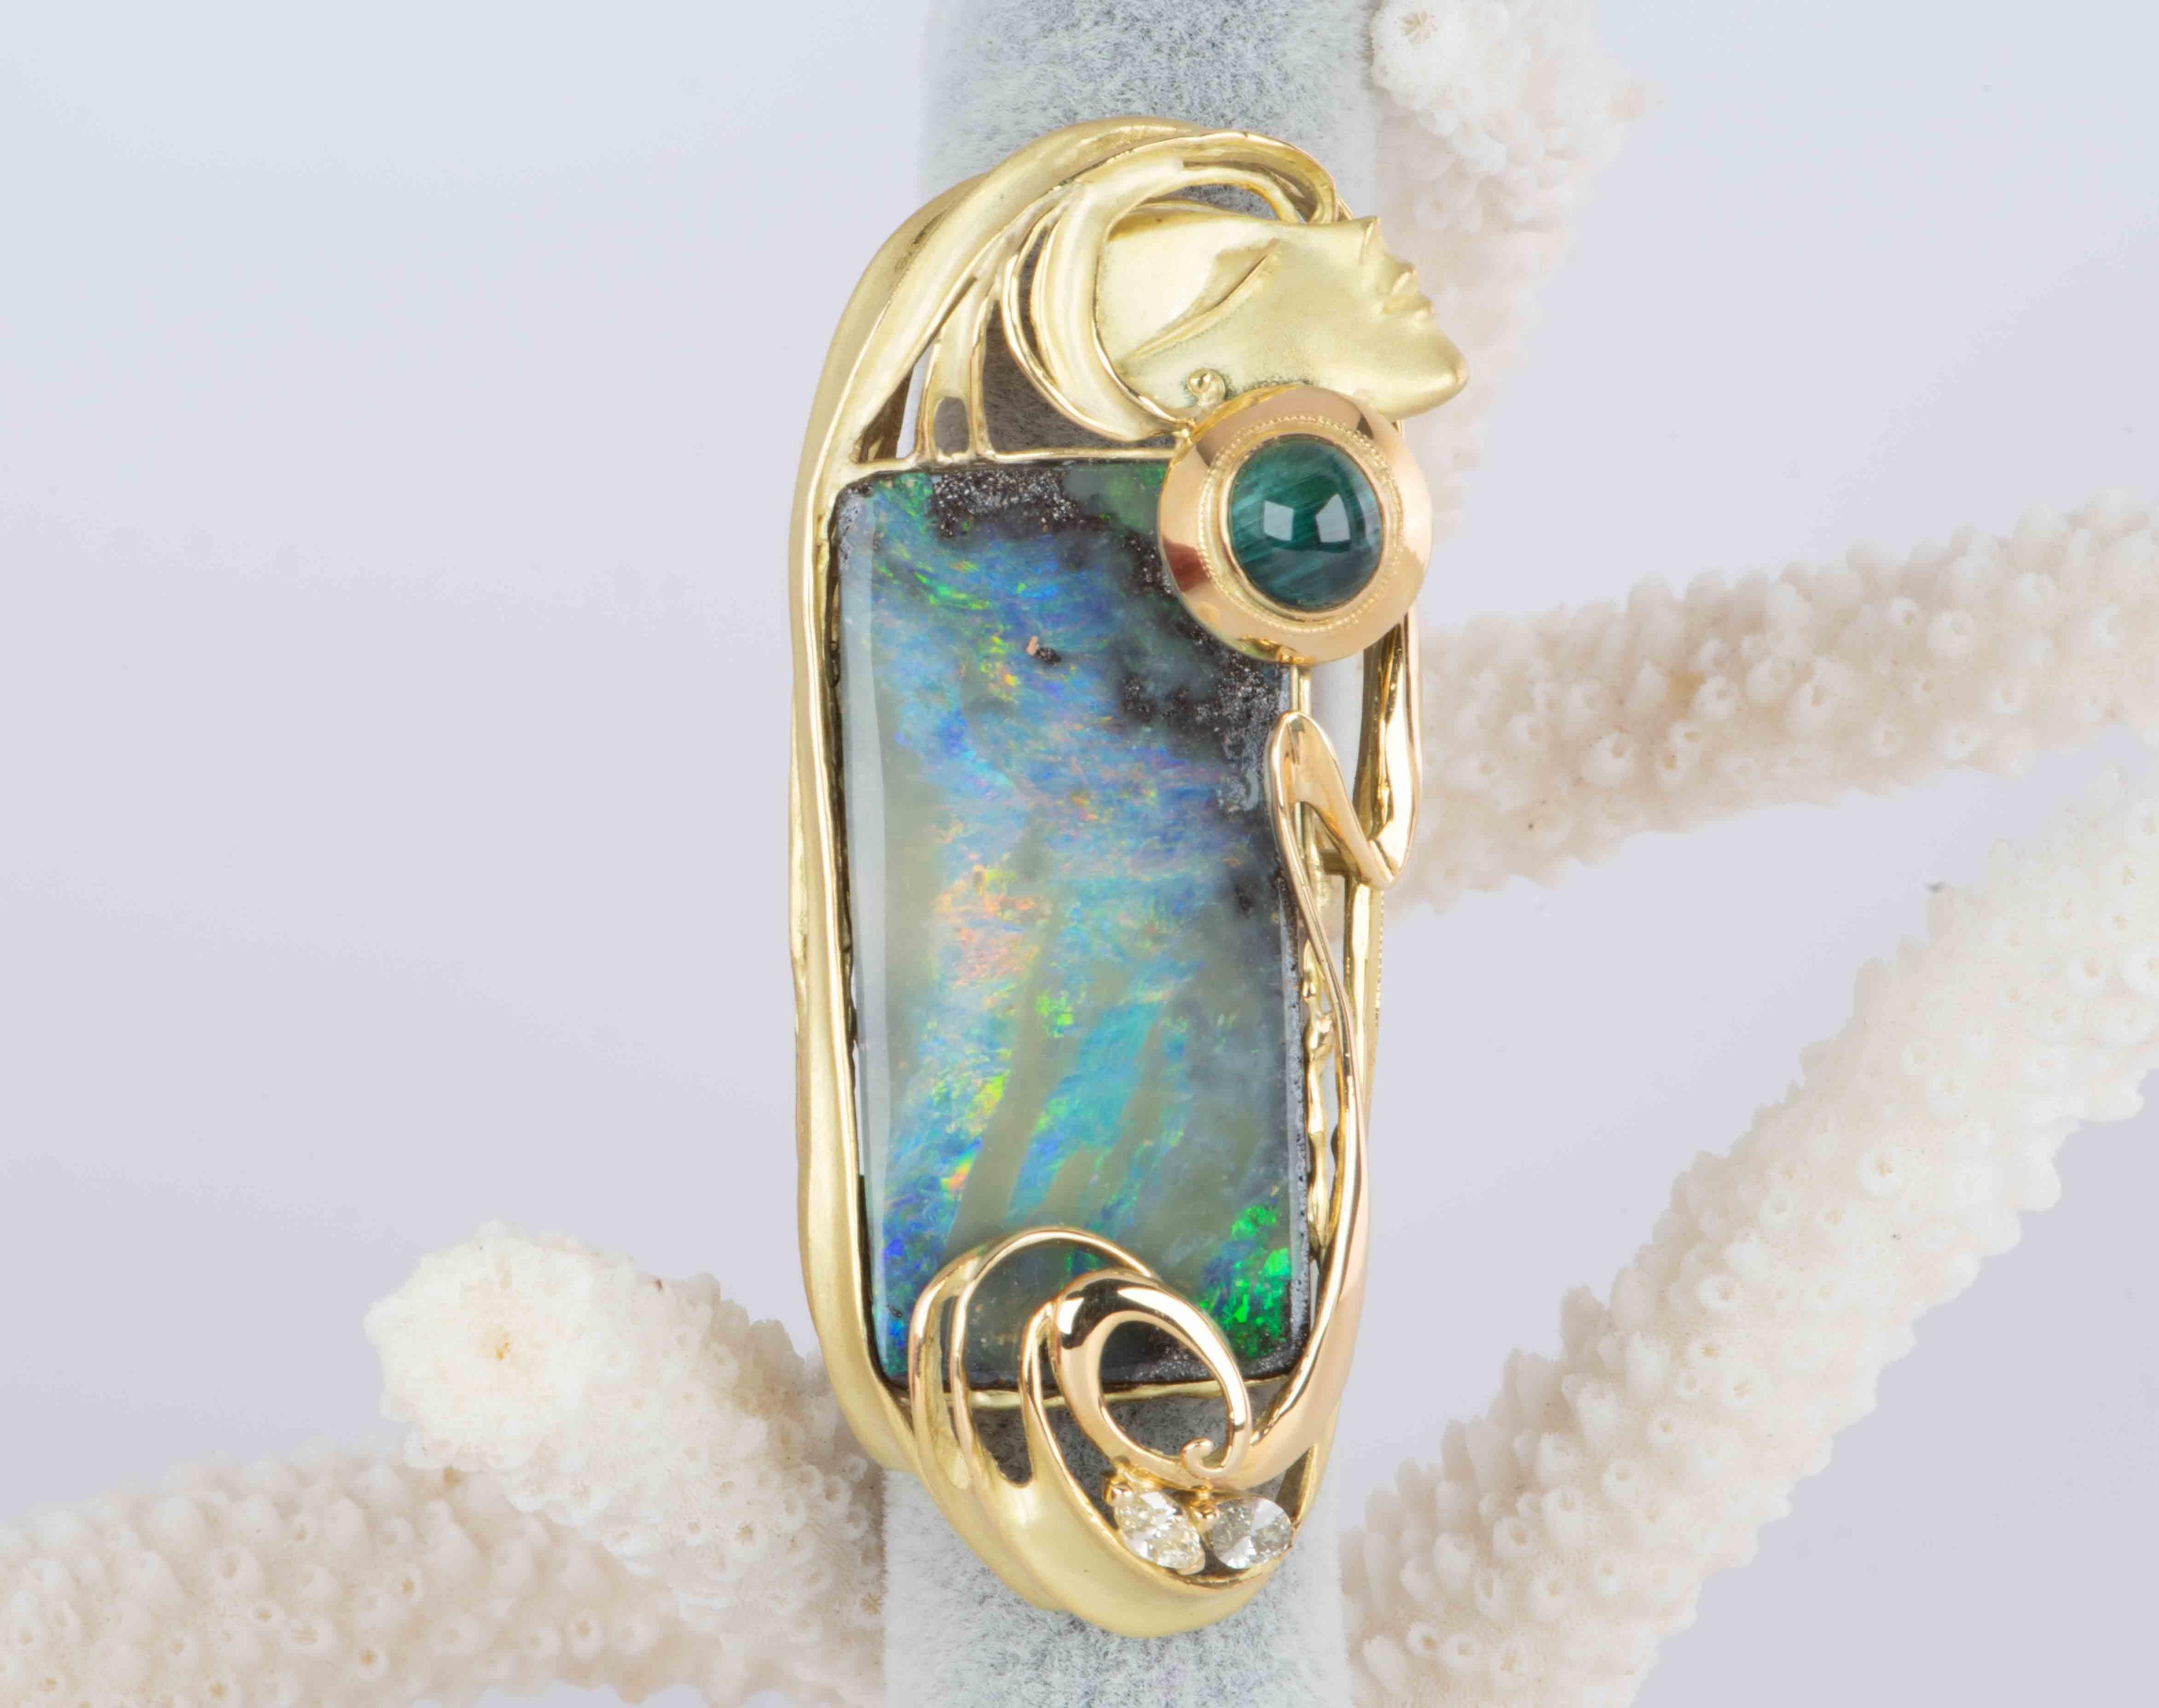 This striking statement piece is crafted from 18K gold and features a stunning Australian boulder opal boasting a weight of 38.17ct! The unique design is structured like an Italian Renaissance painting, casting a soft lady face at the top right